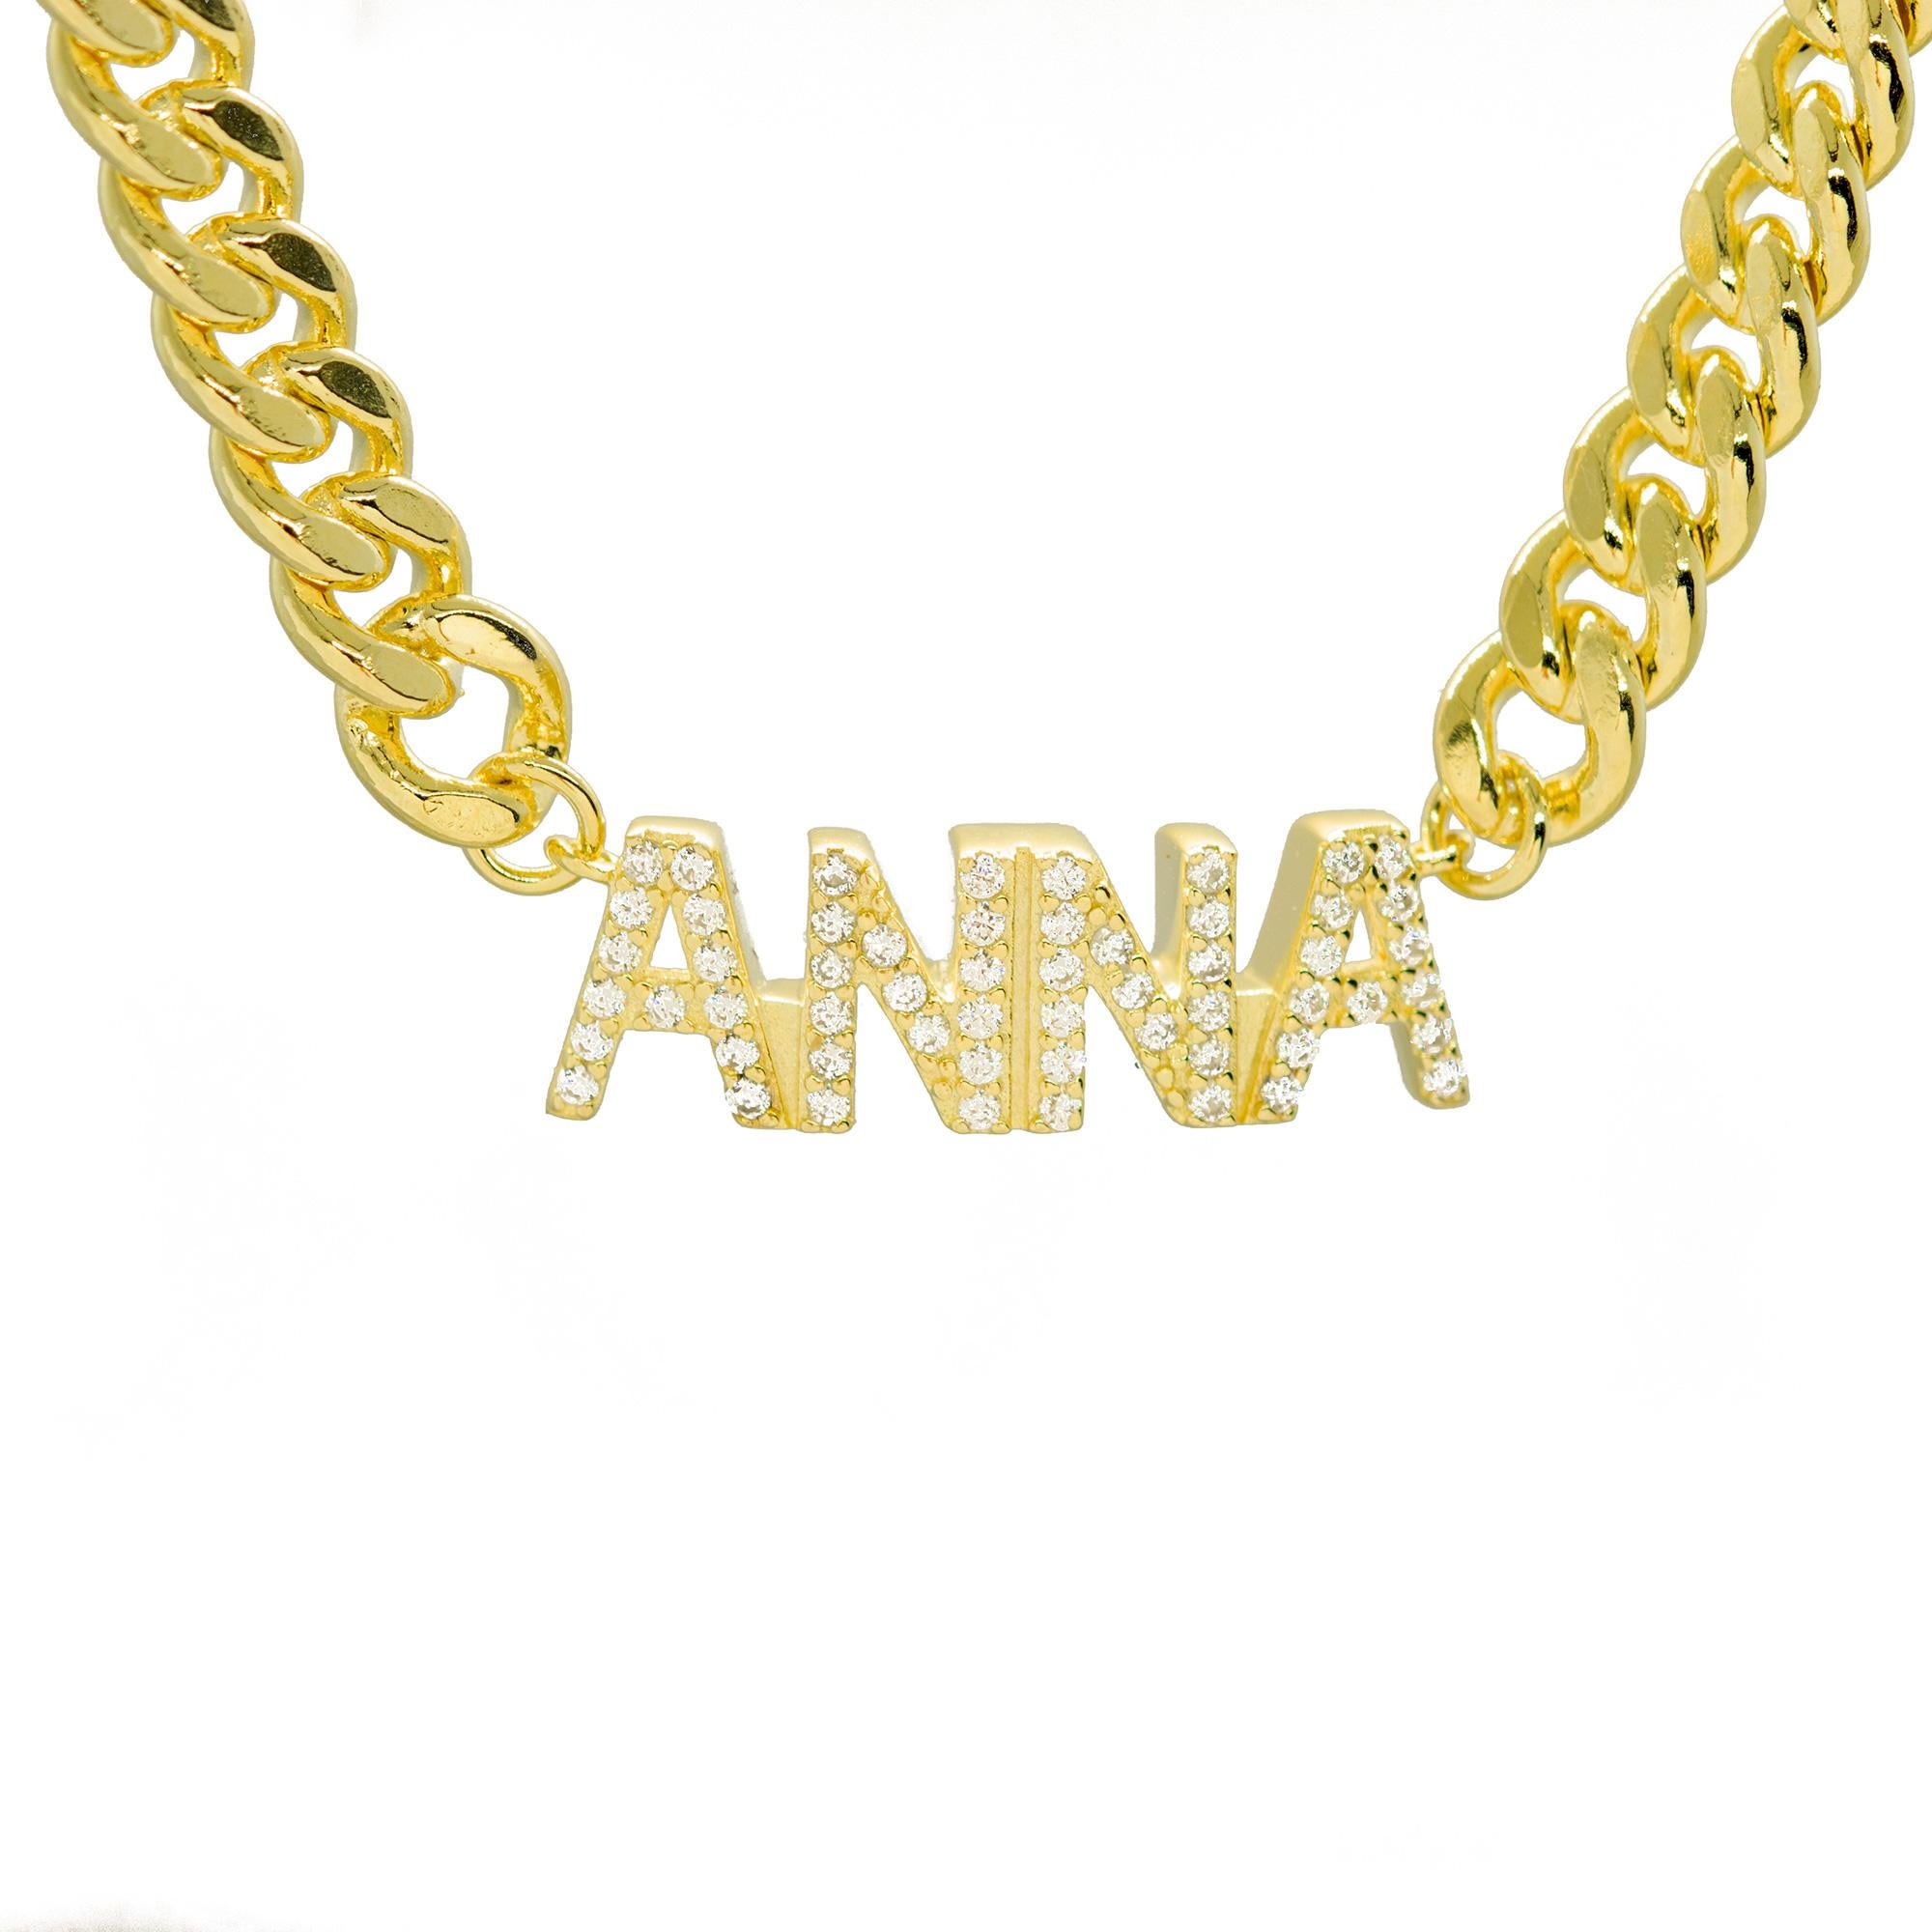 Gold Plate Zircon Chain Name Letters Customisable Chiara Intini Jewels Necklace For Sale 1